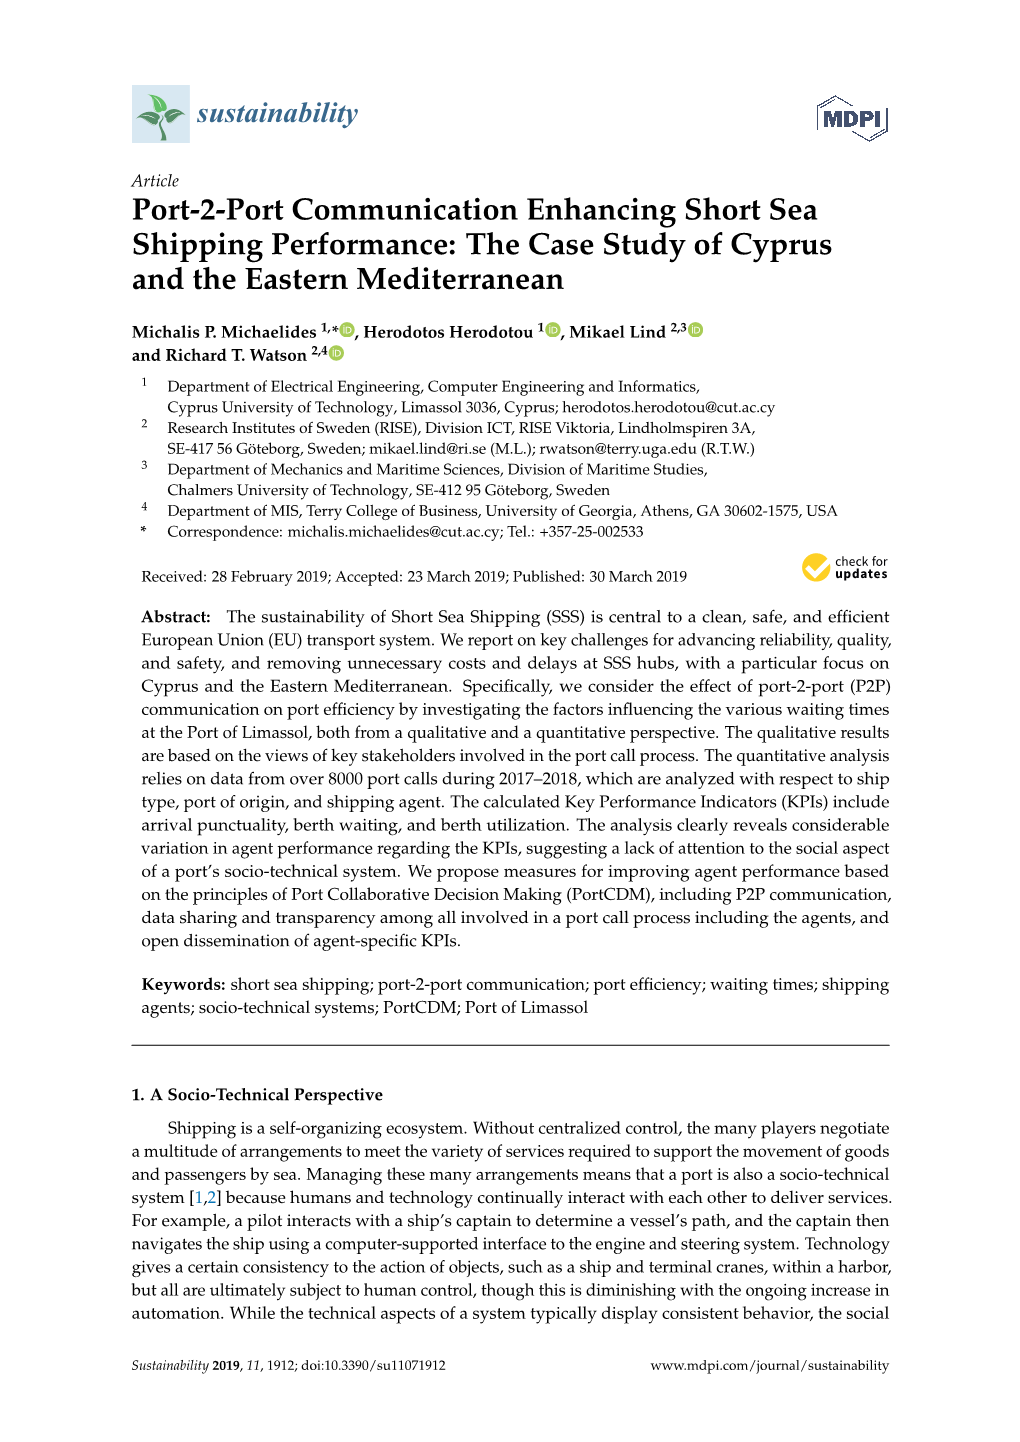 Port-2-Port Communication Enhancing Short Sea Shipping Performance: the Case Study of Cyprus and the Eastern Mediterranean